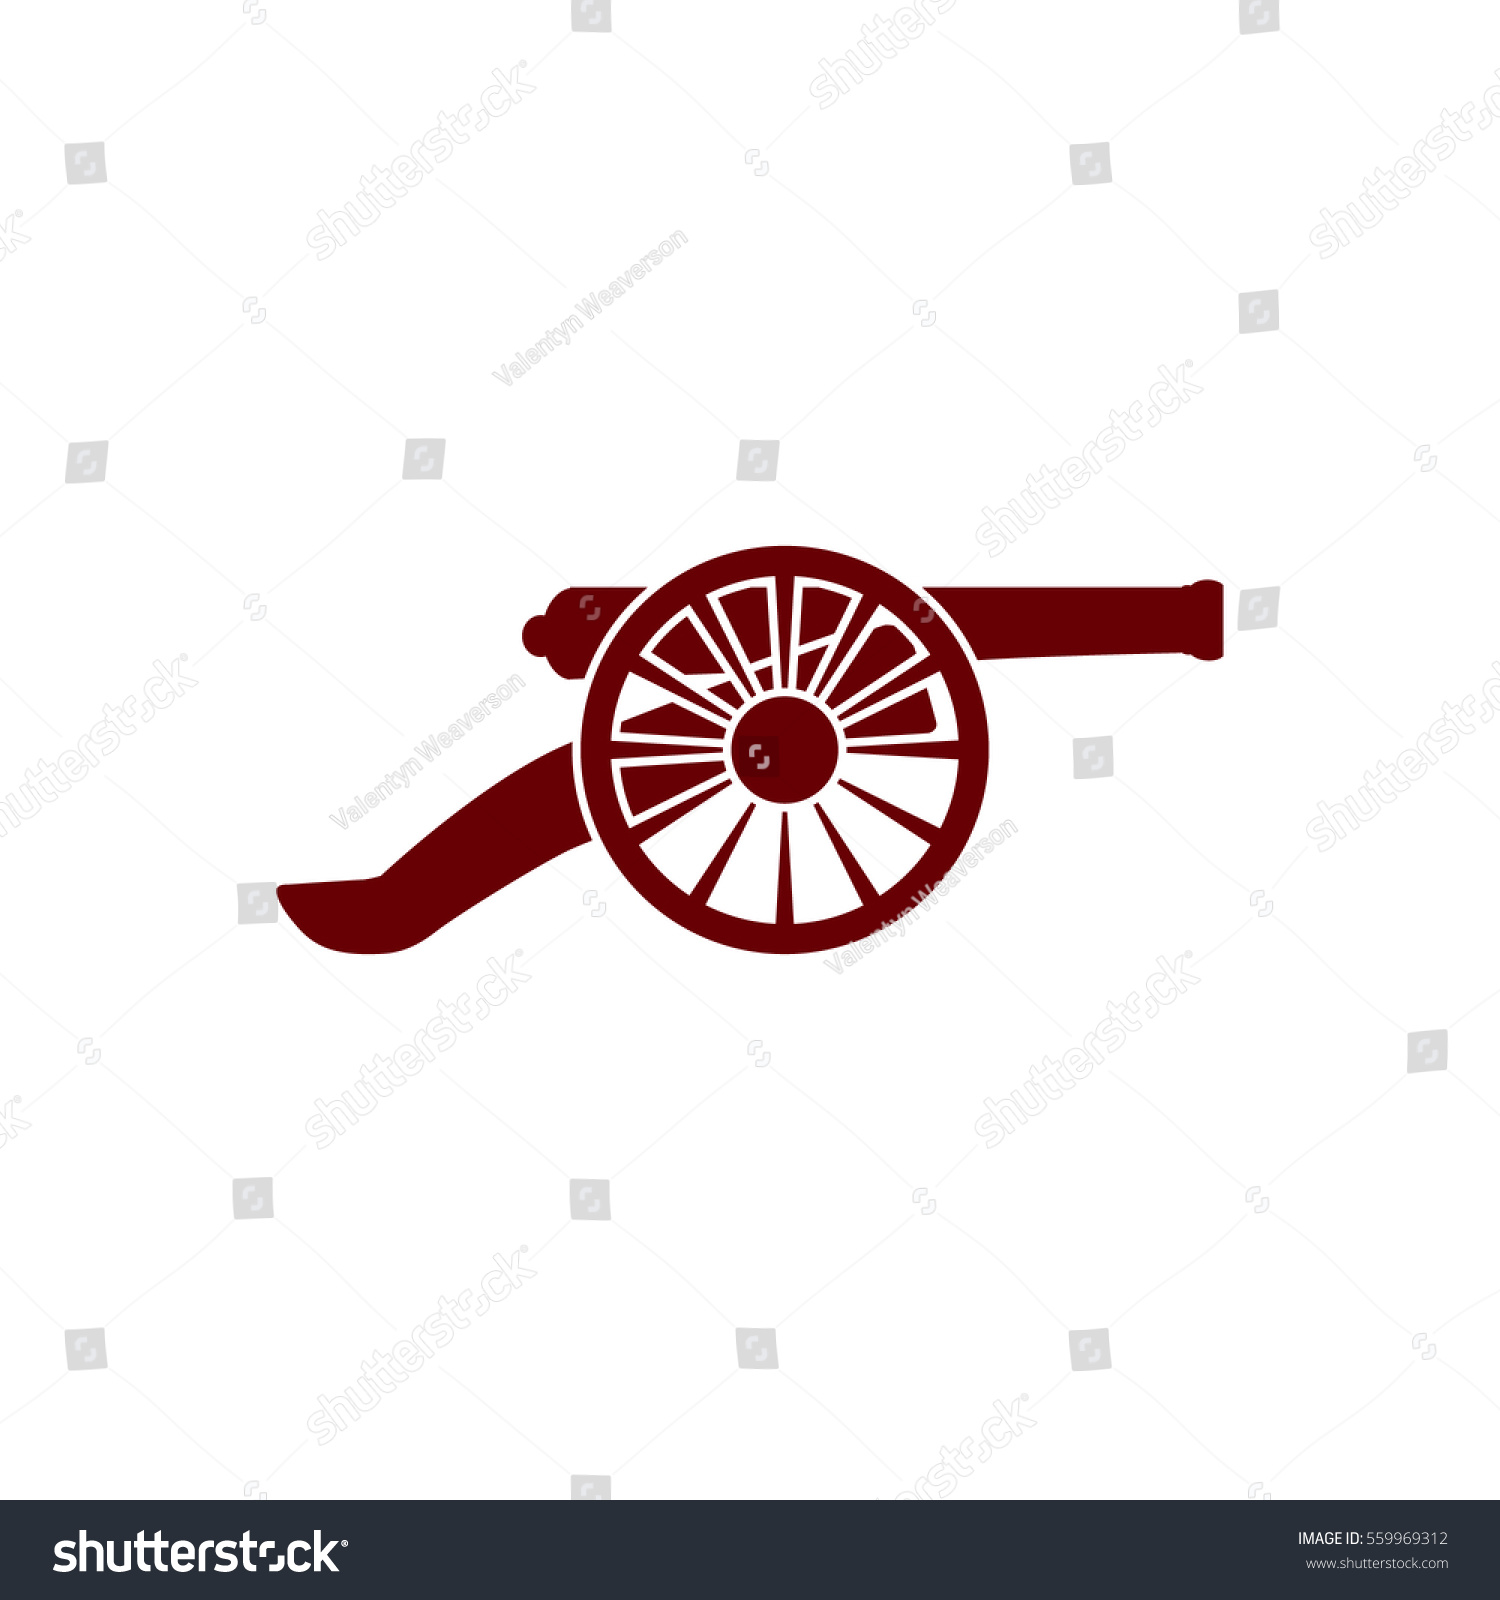 3,636 Arsenal cannon Images, Stock Photos & Vectors | Shutterstock